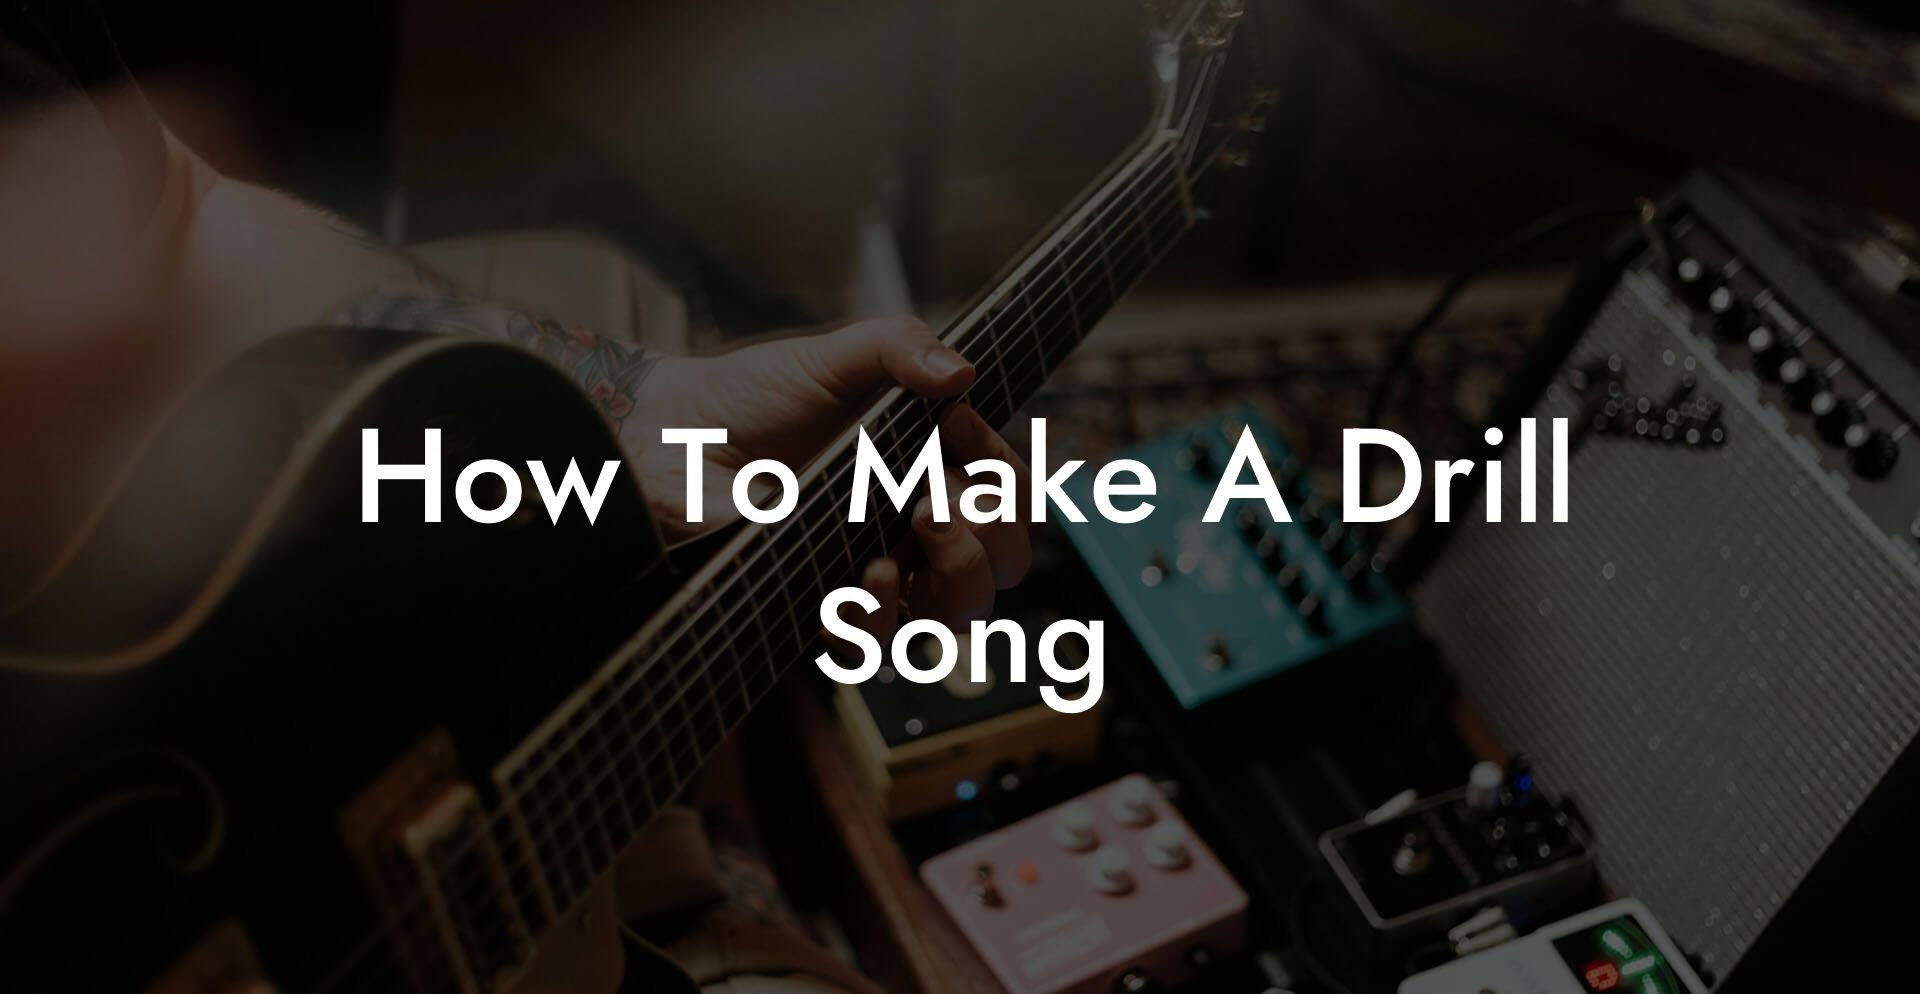 how to make a drill song lyric assistant